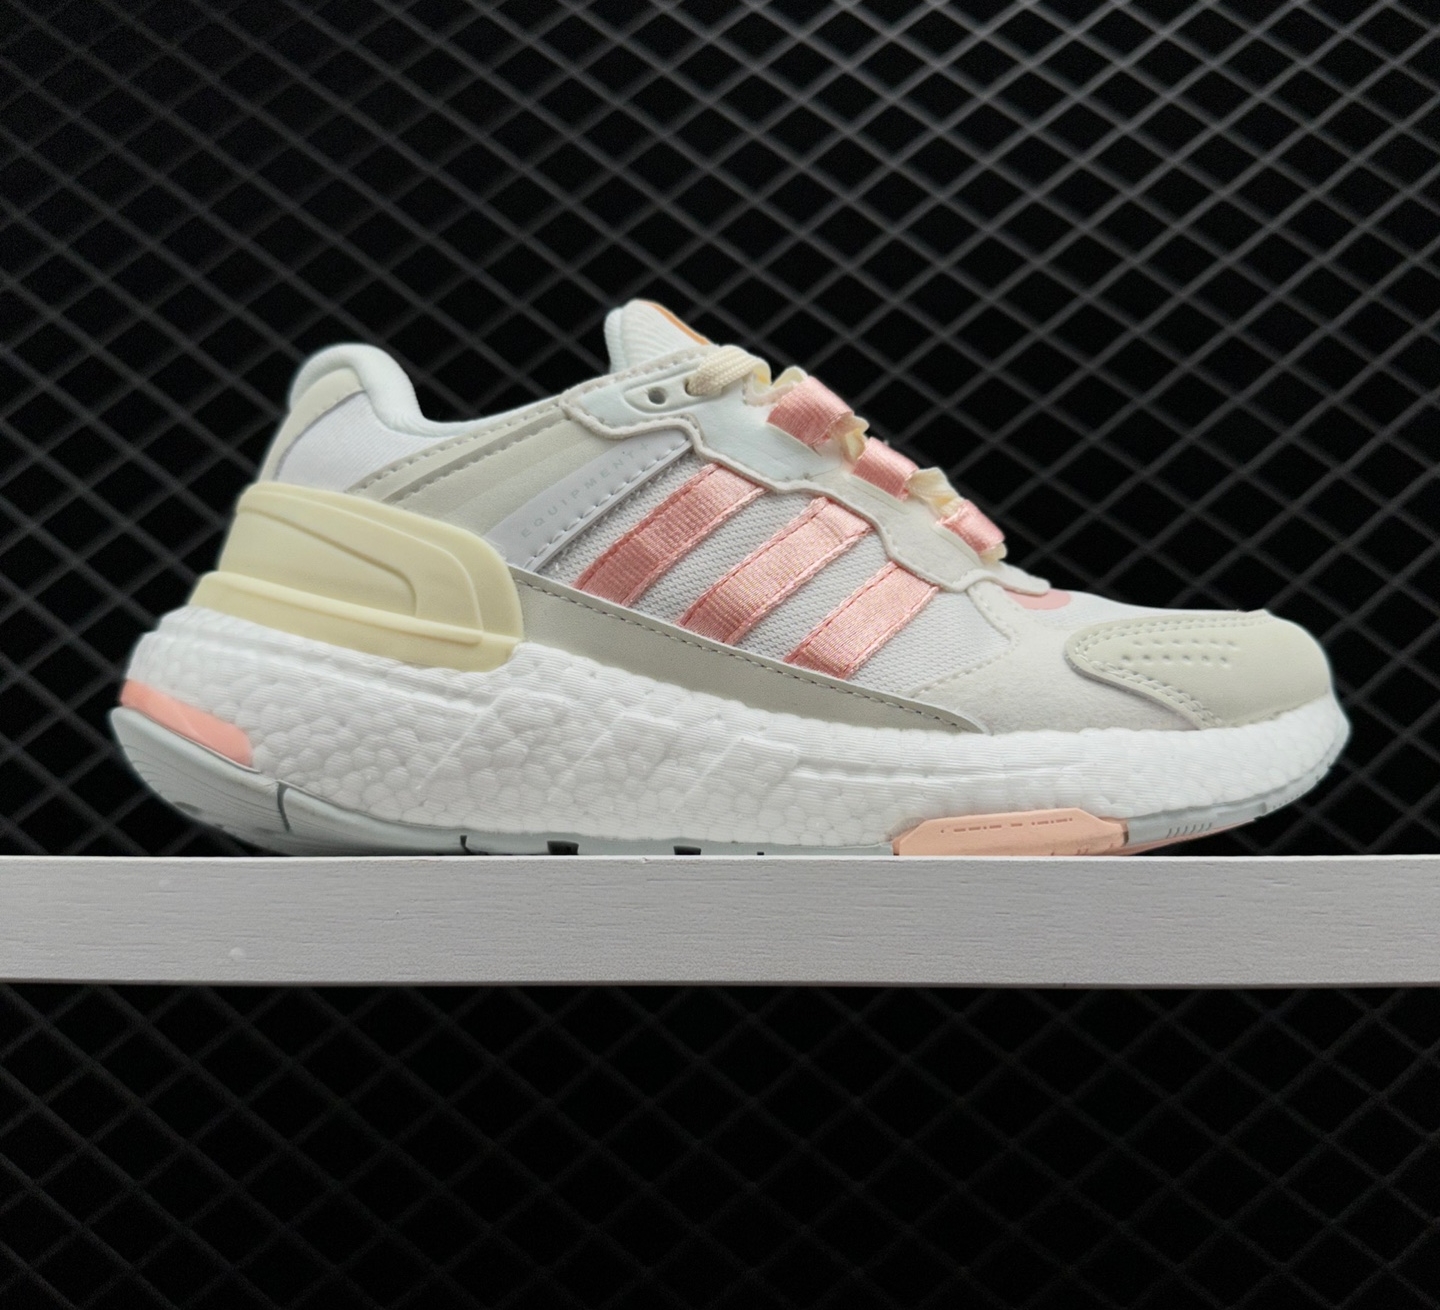 Adidas EQUIPMENT Cloud White Grey Pink GX6631 - Buy Online Now